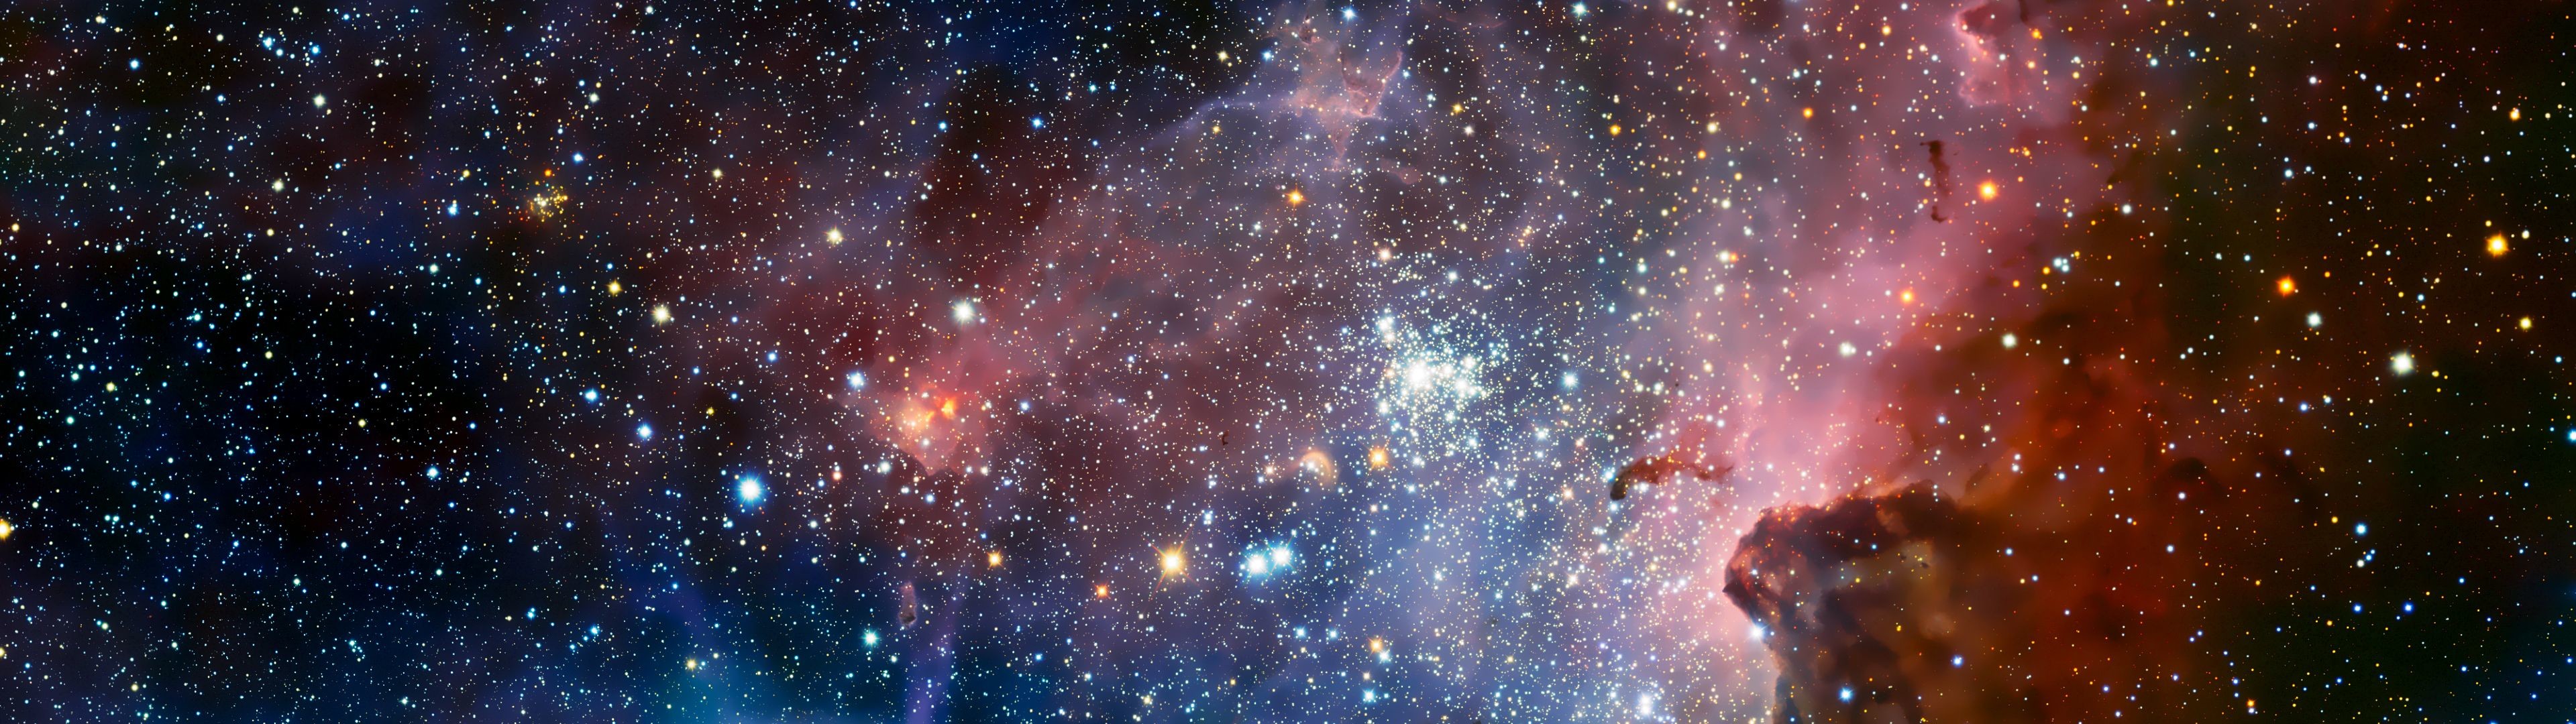 3840x1080 Outer space wallpaper  181944 wallpaperup - 3840 1080 Wallpaper  Images 47. Download